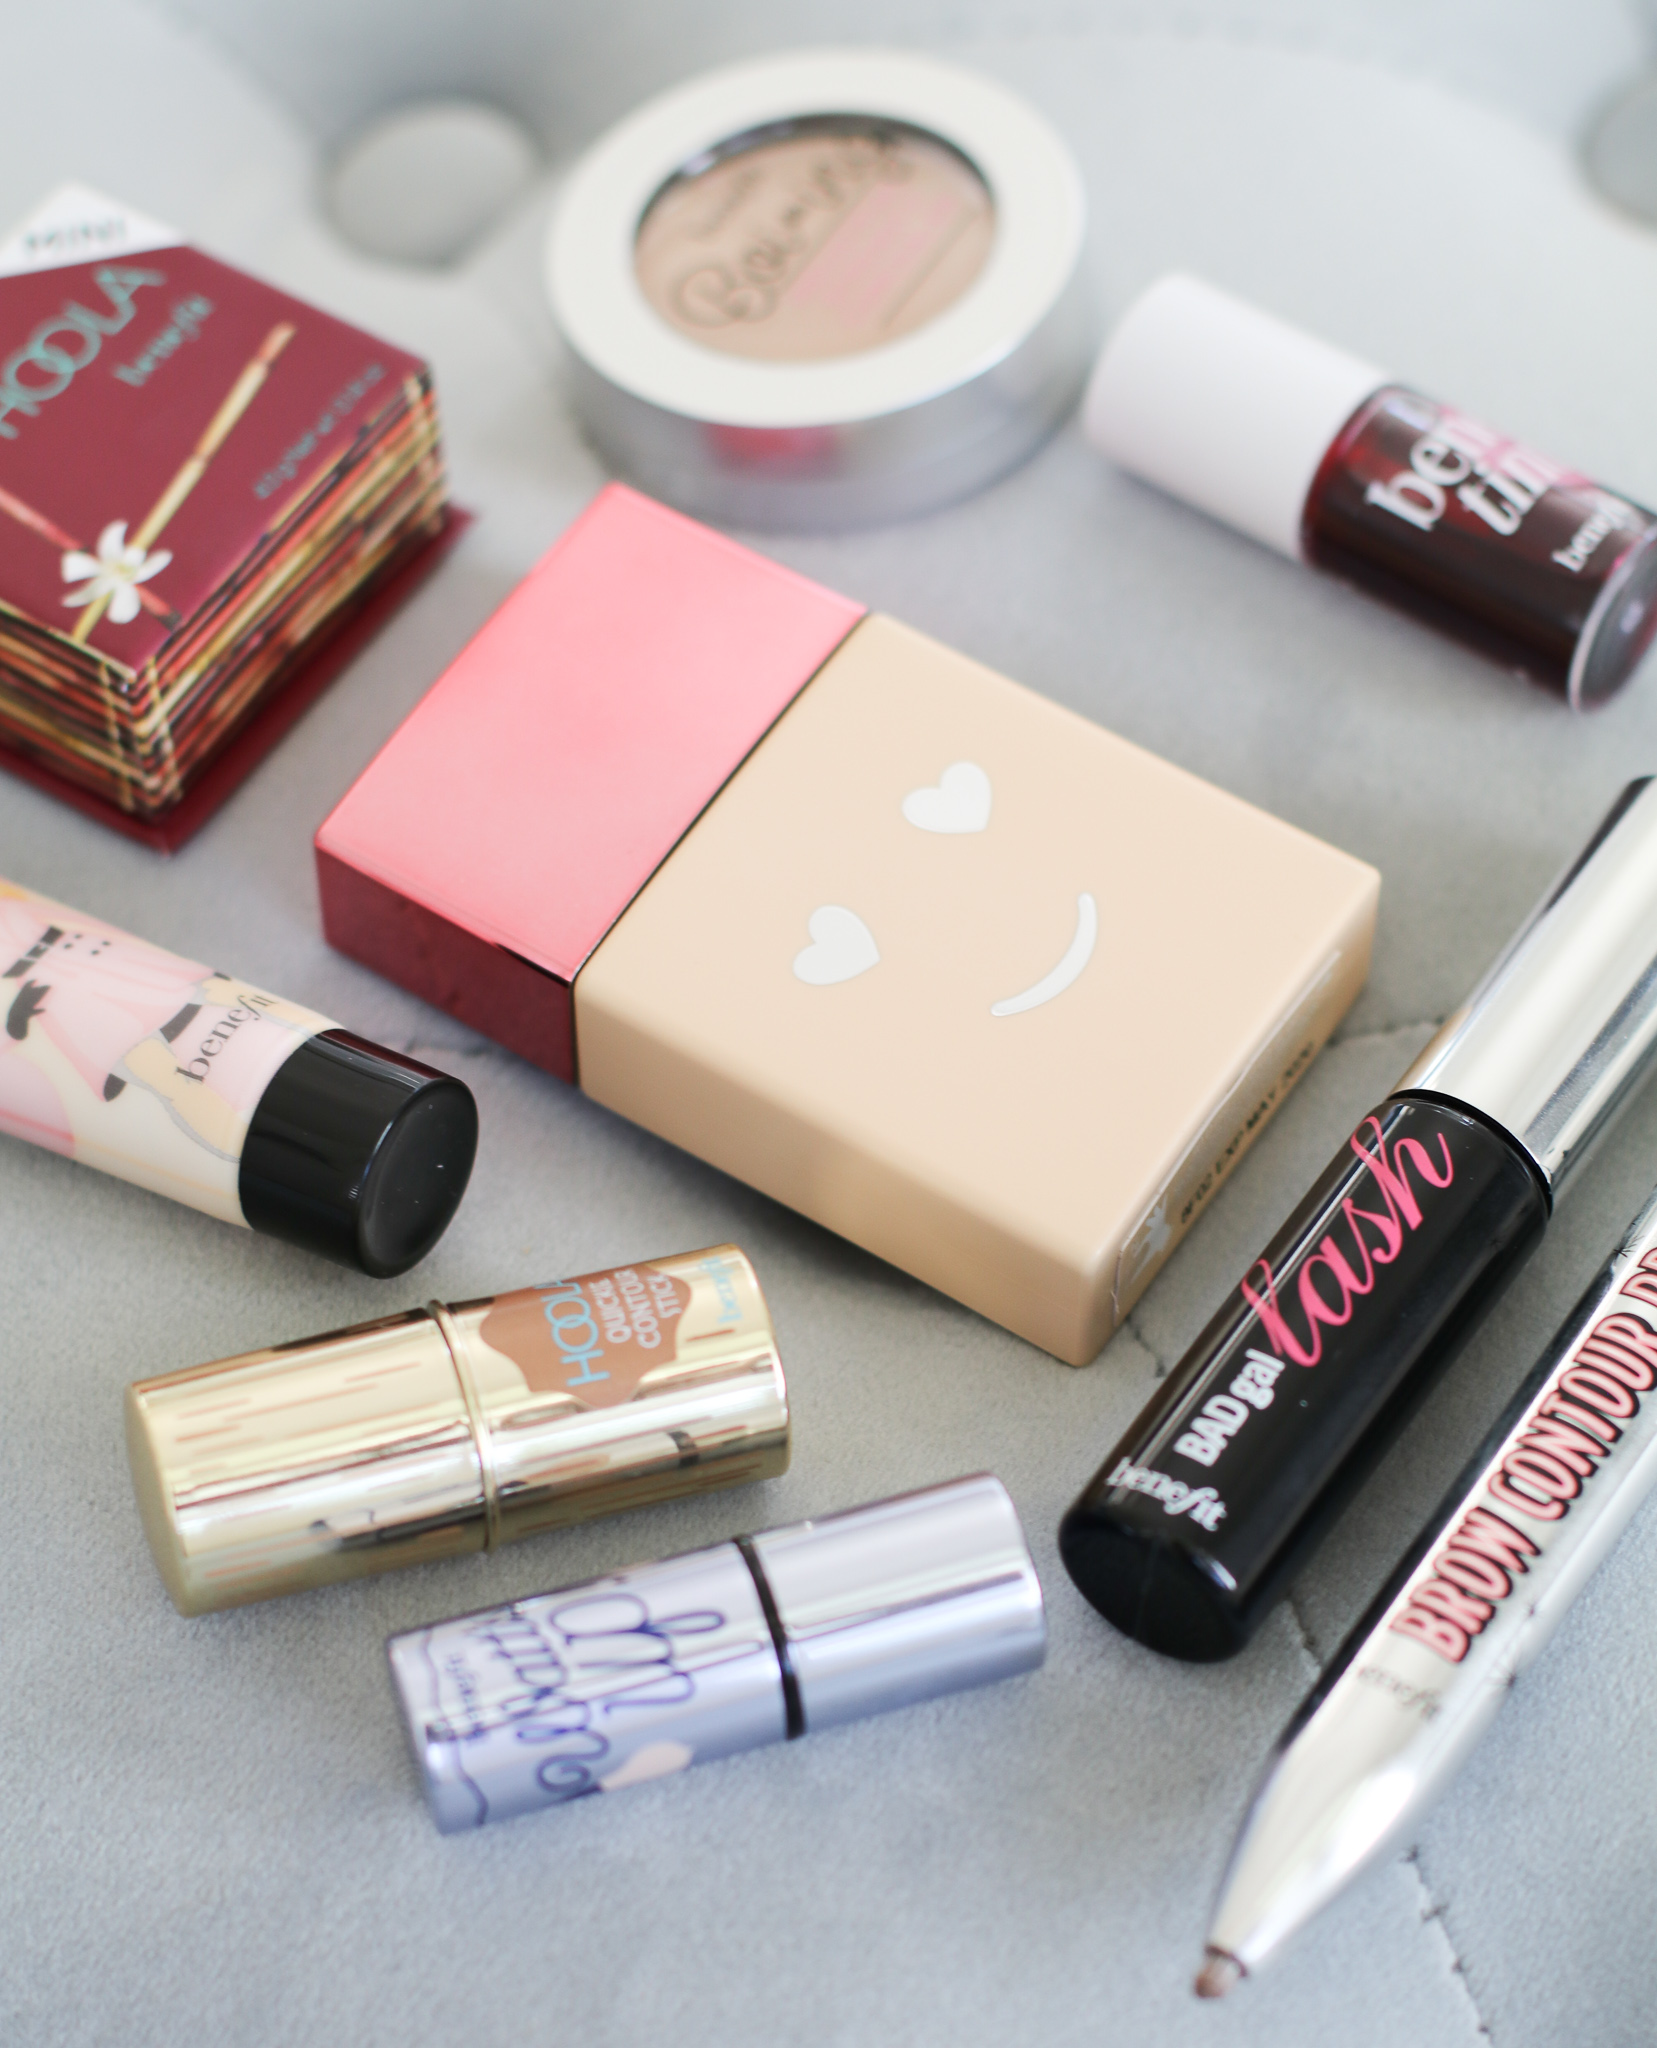 Benefit Cosmetics Full Face Review